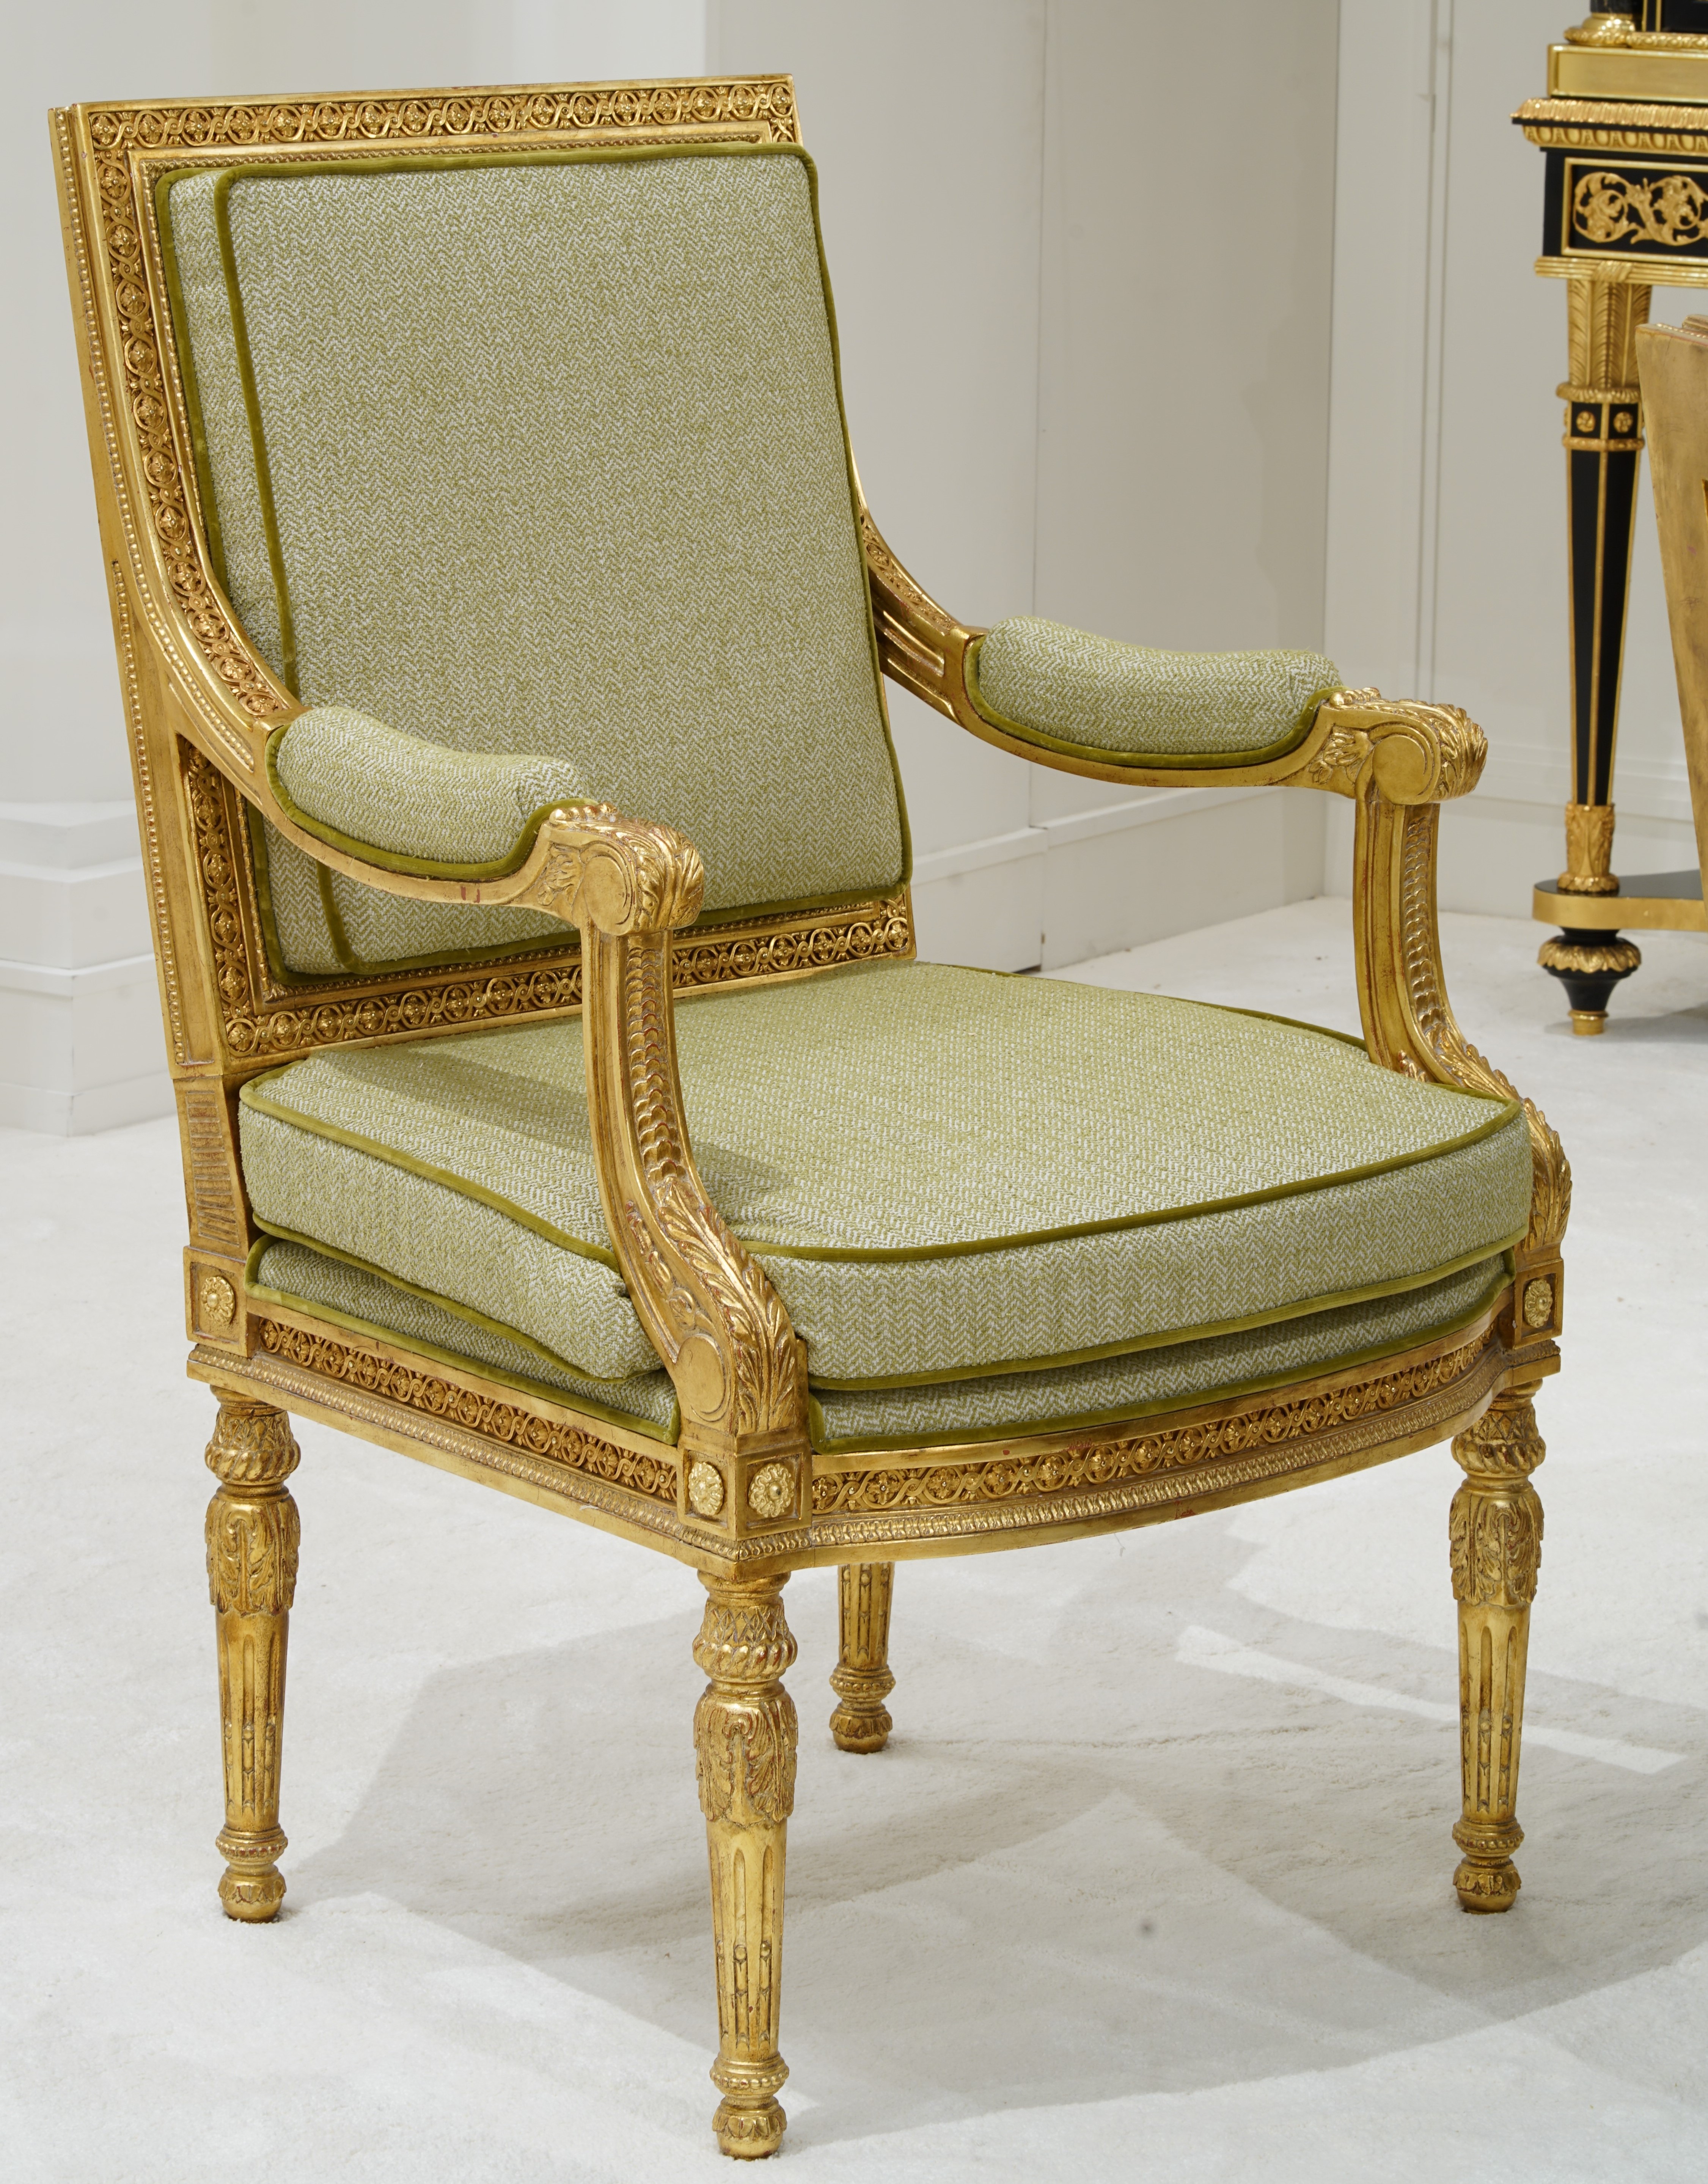 Dining Chairs Gorgeous Golden Green Chair from our furniture showpiece collection.